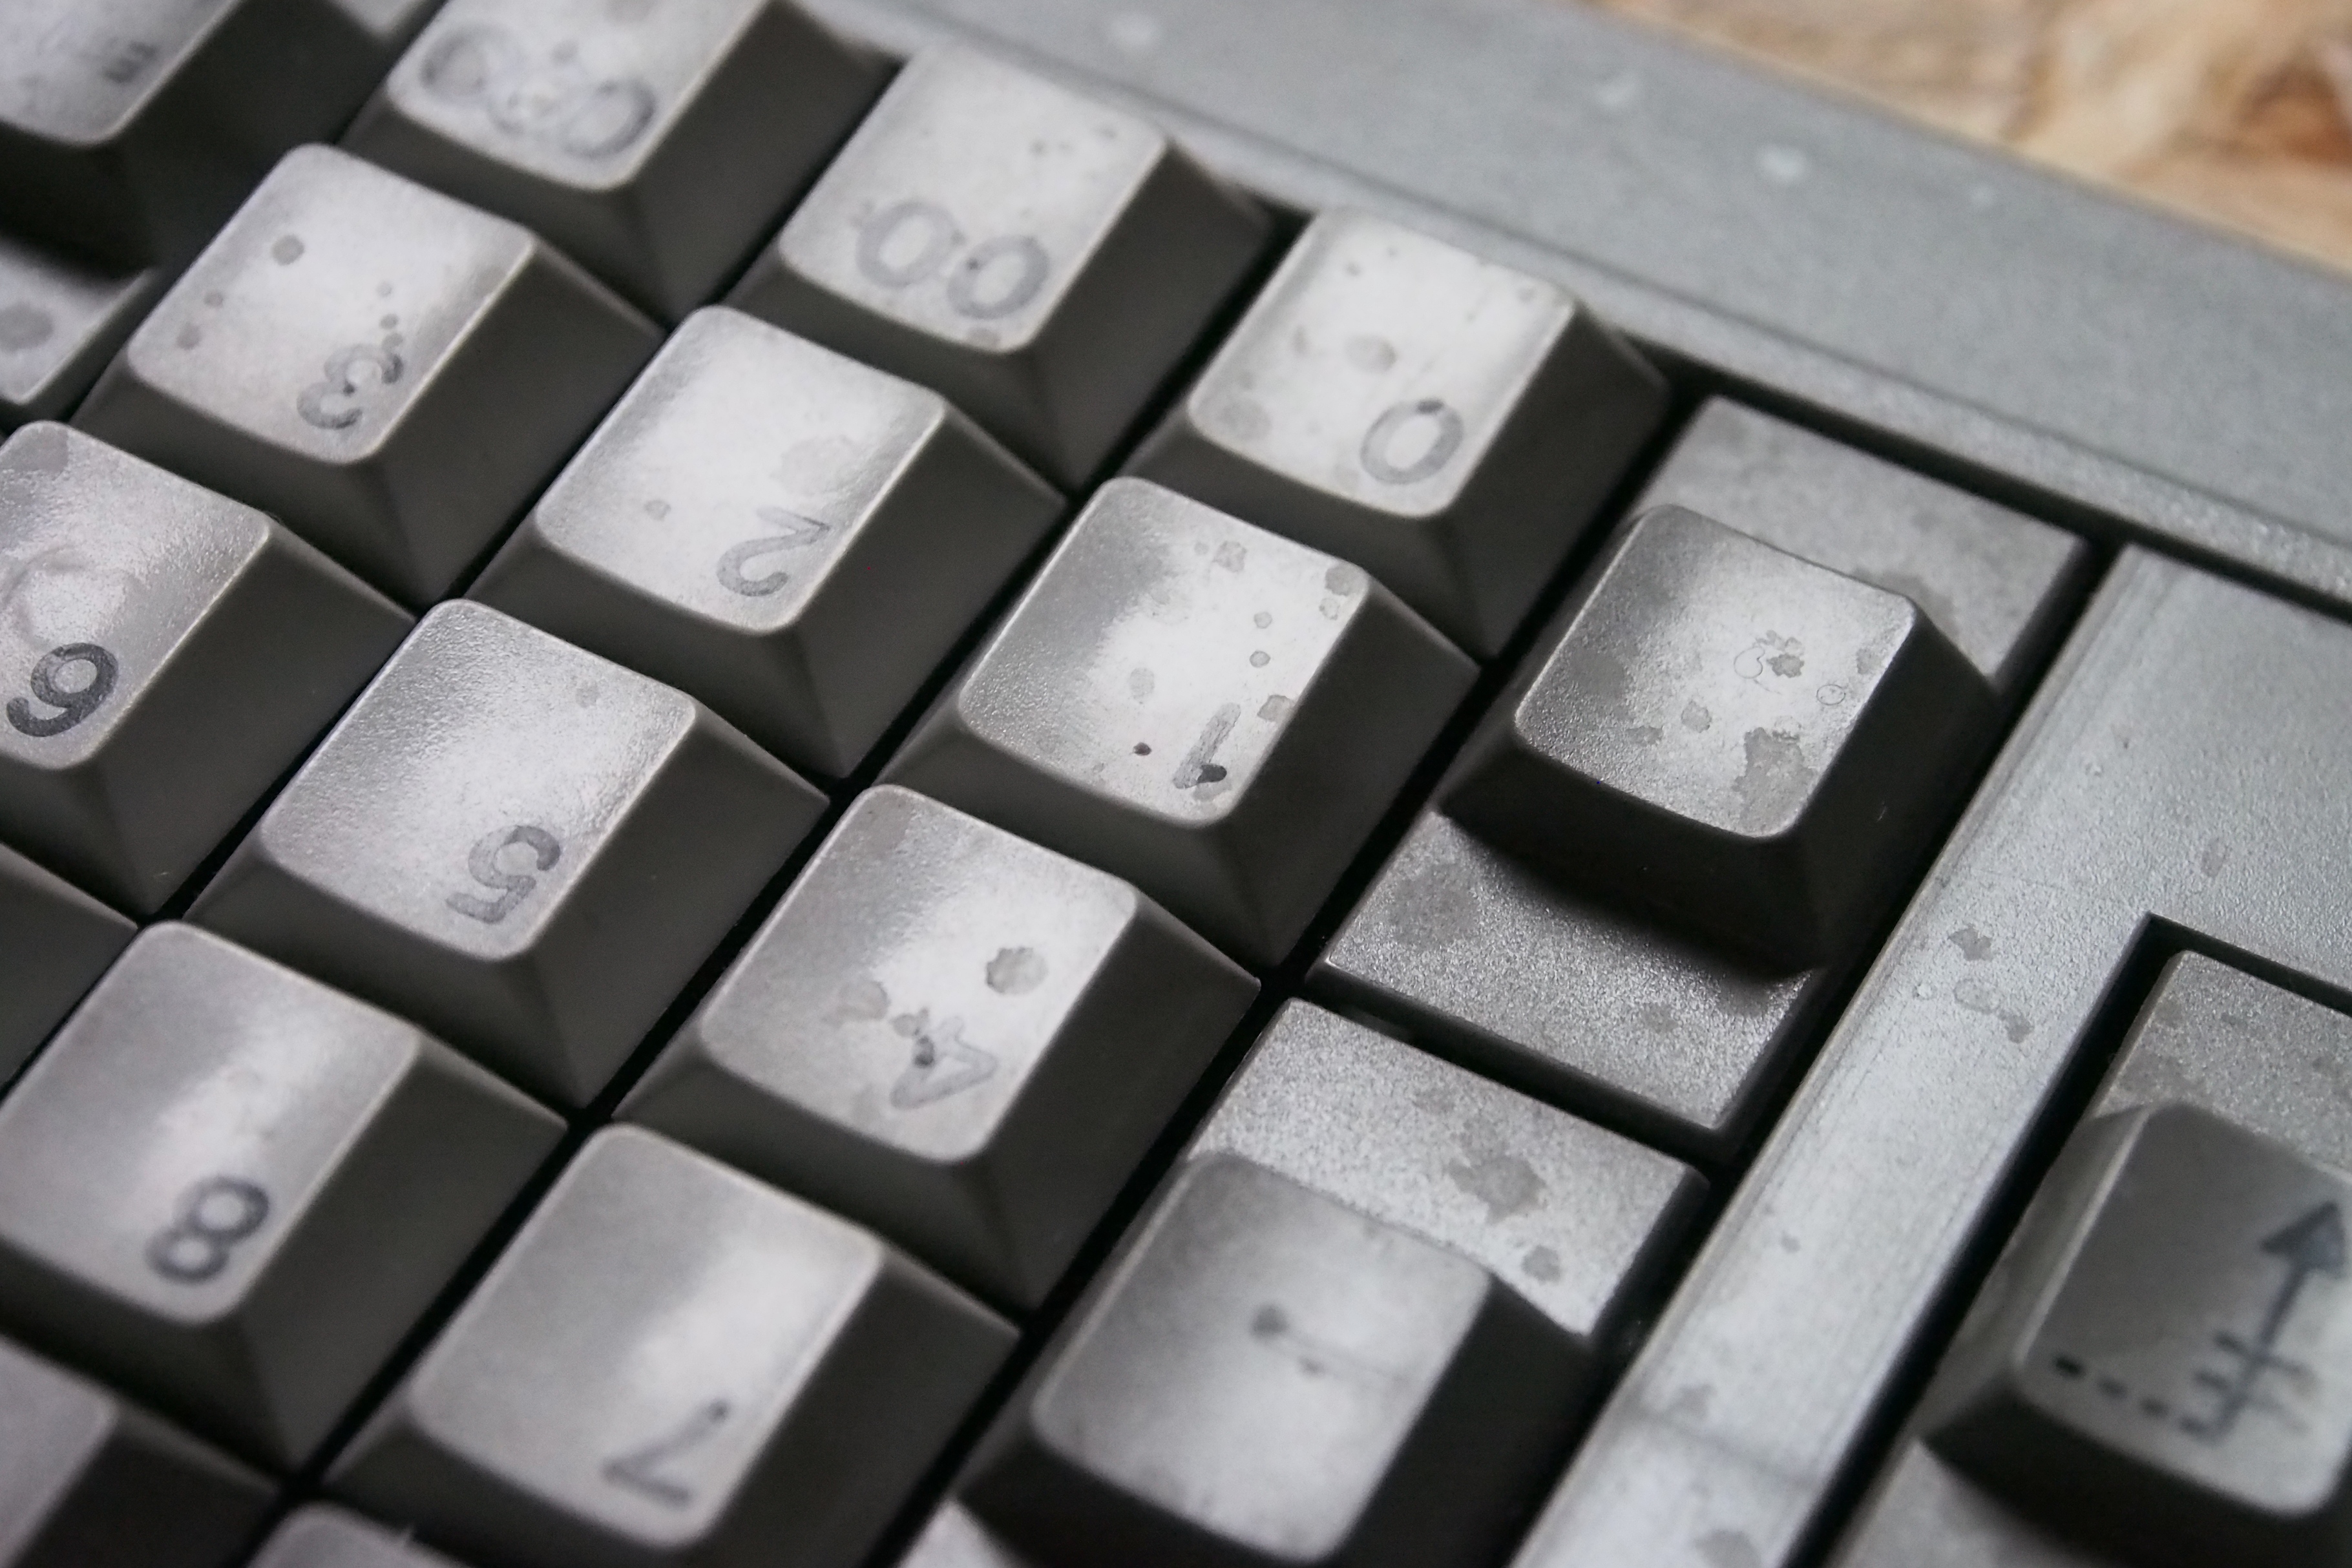 Unfortunately, the keyboard was coated in something nasty, which I can't seem to get off